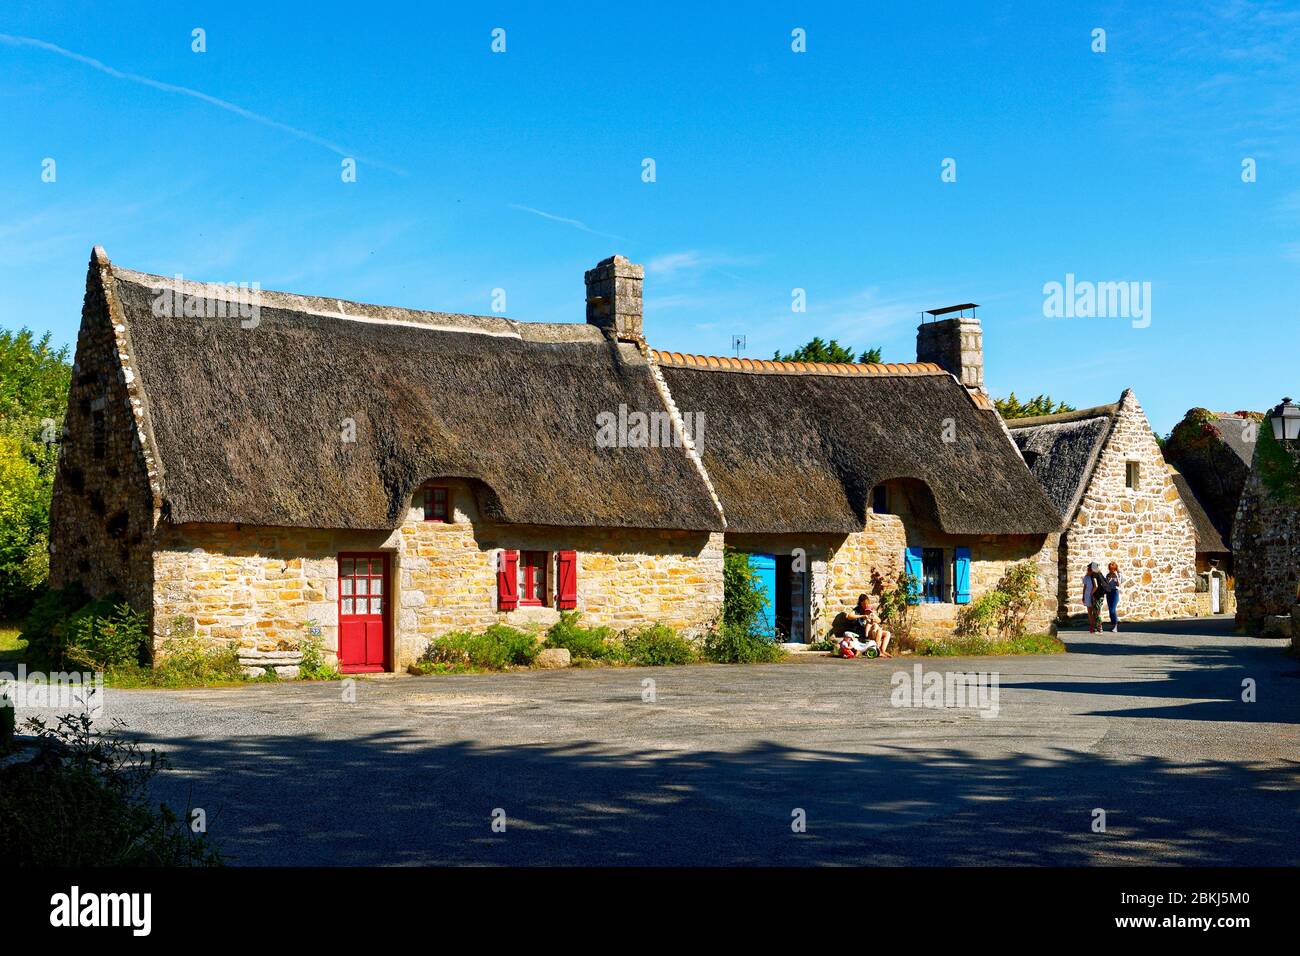 France, Finistere, Pont Aven Region near Nevez, Thatched Cottages of Kerascoet Stock Photo